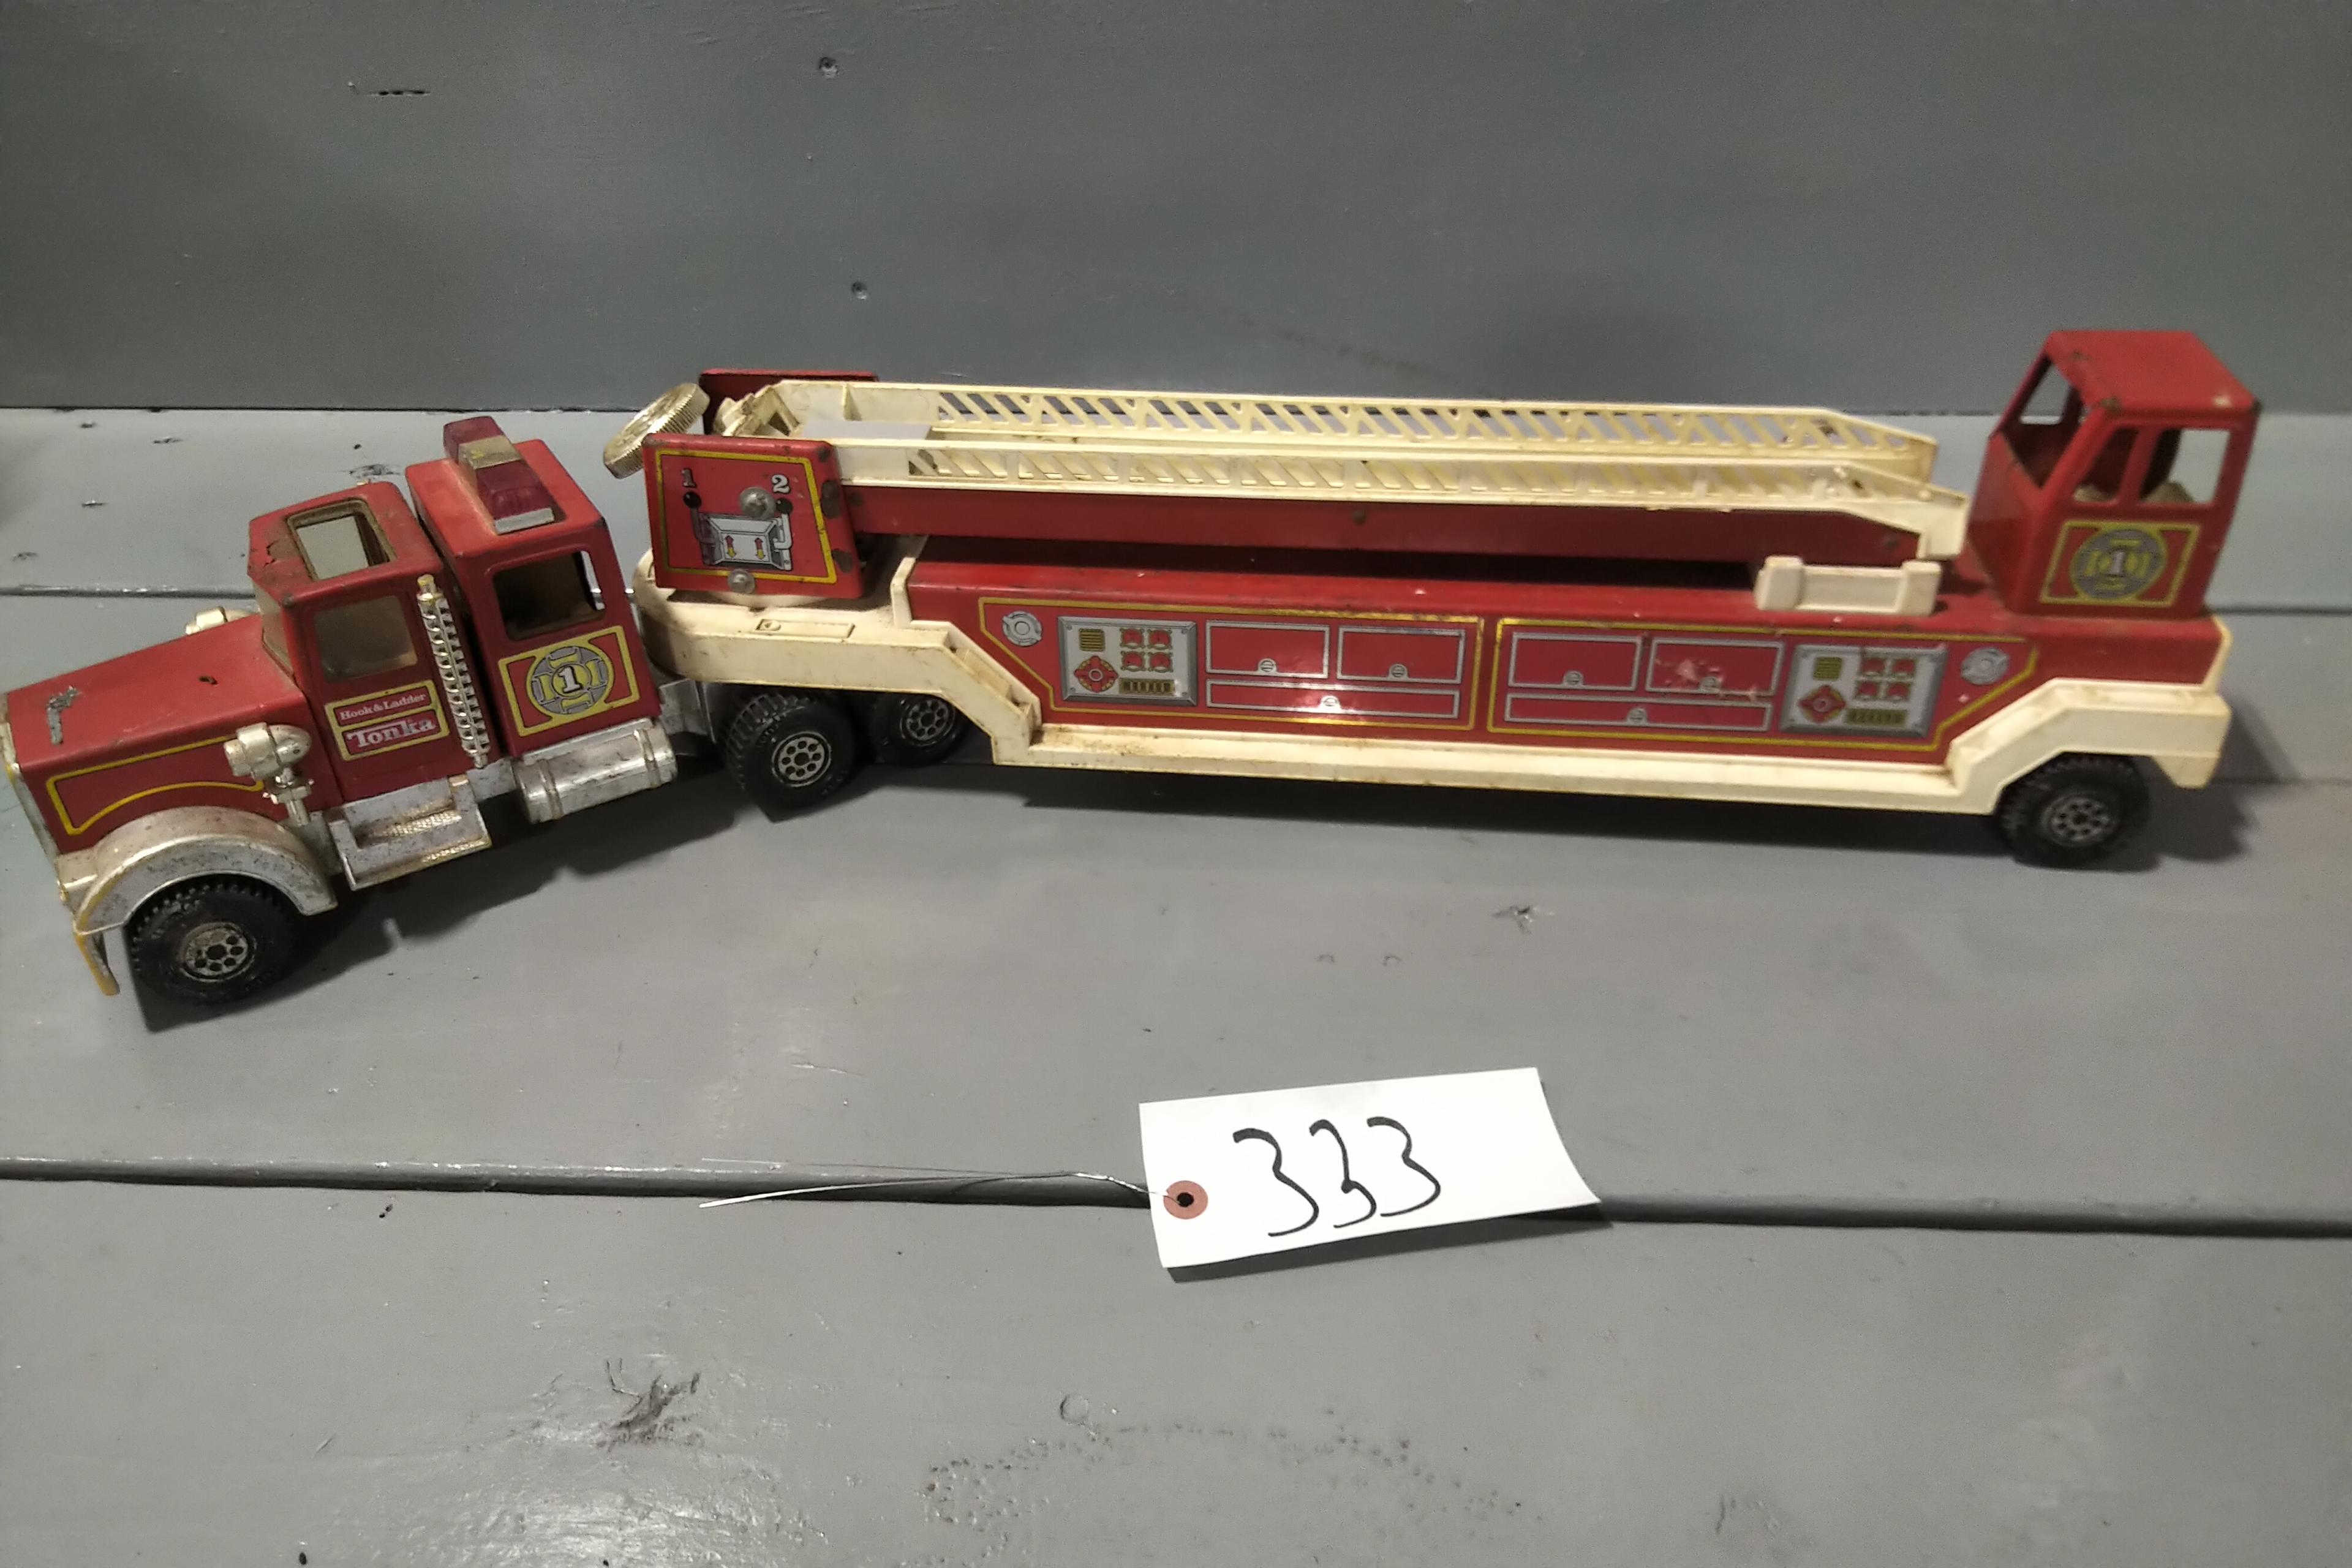 1/16 TONKA FIRETRUCK WITH LADER, 1/32 SCALE FIRE TRUCK, 1/16 SCALE RAM 3500 SERVICE TRUCK